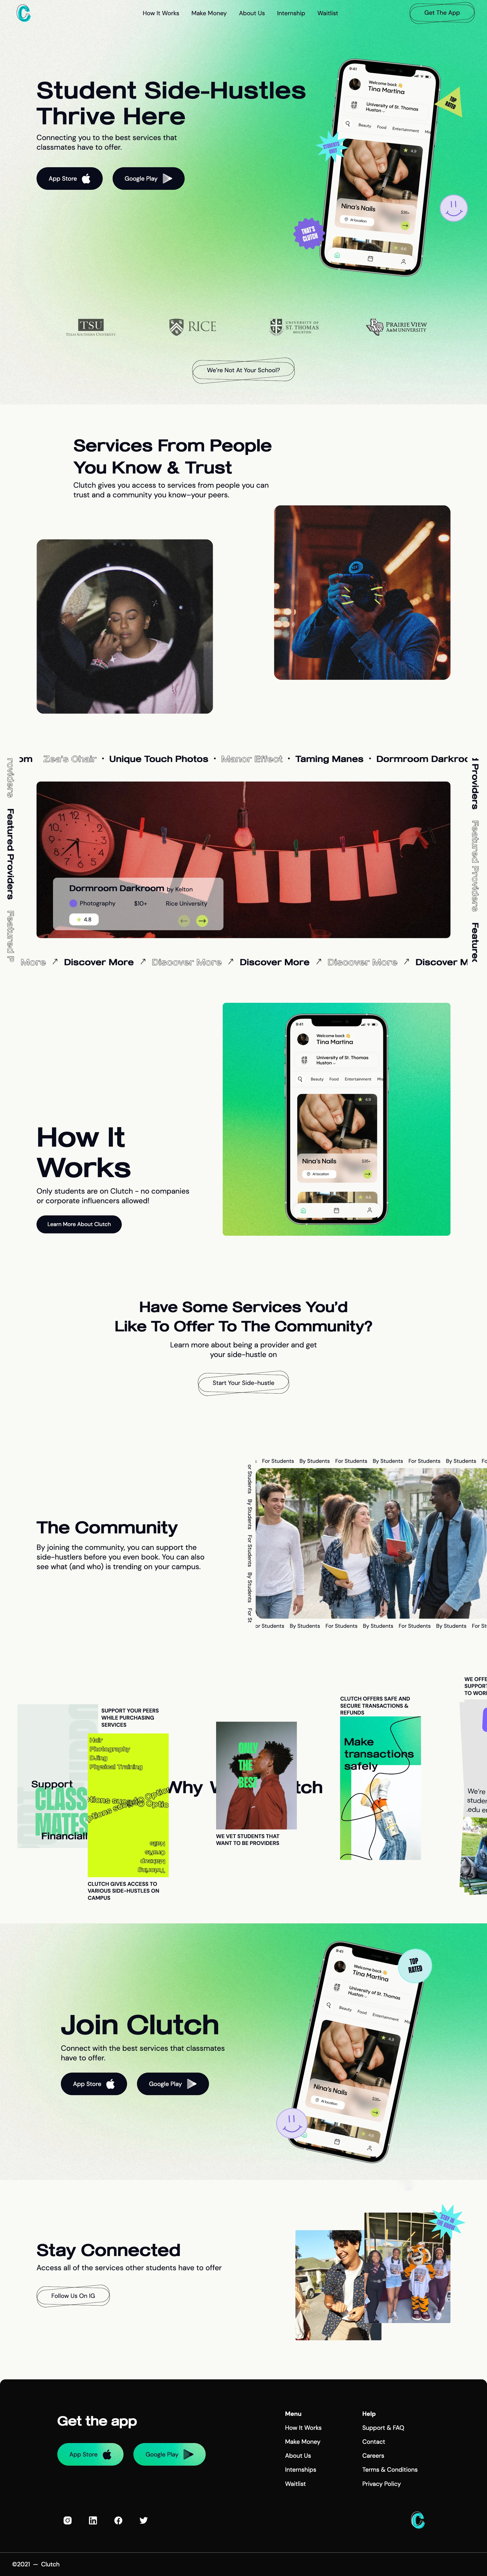 That's Clutch Landing Page Example: Student Side-Hustles Thrive Here. Connecting you to the best services that classmates have to offer.